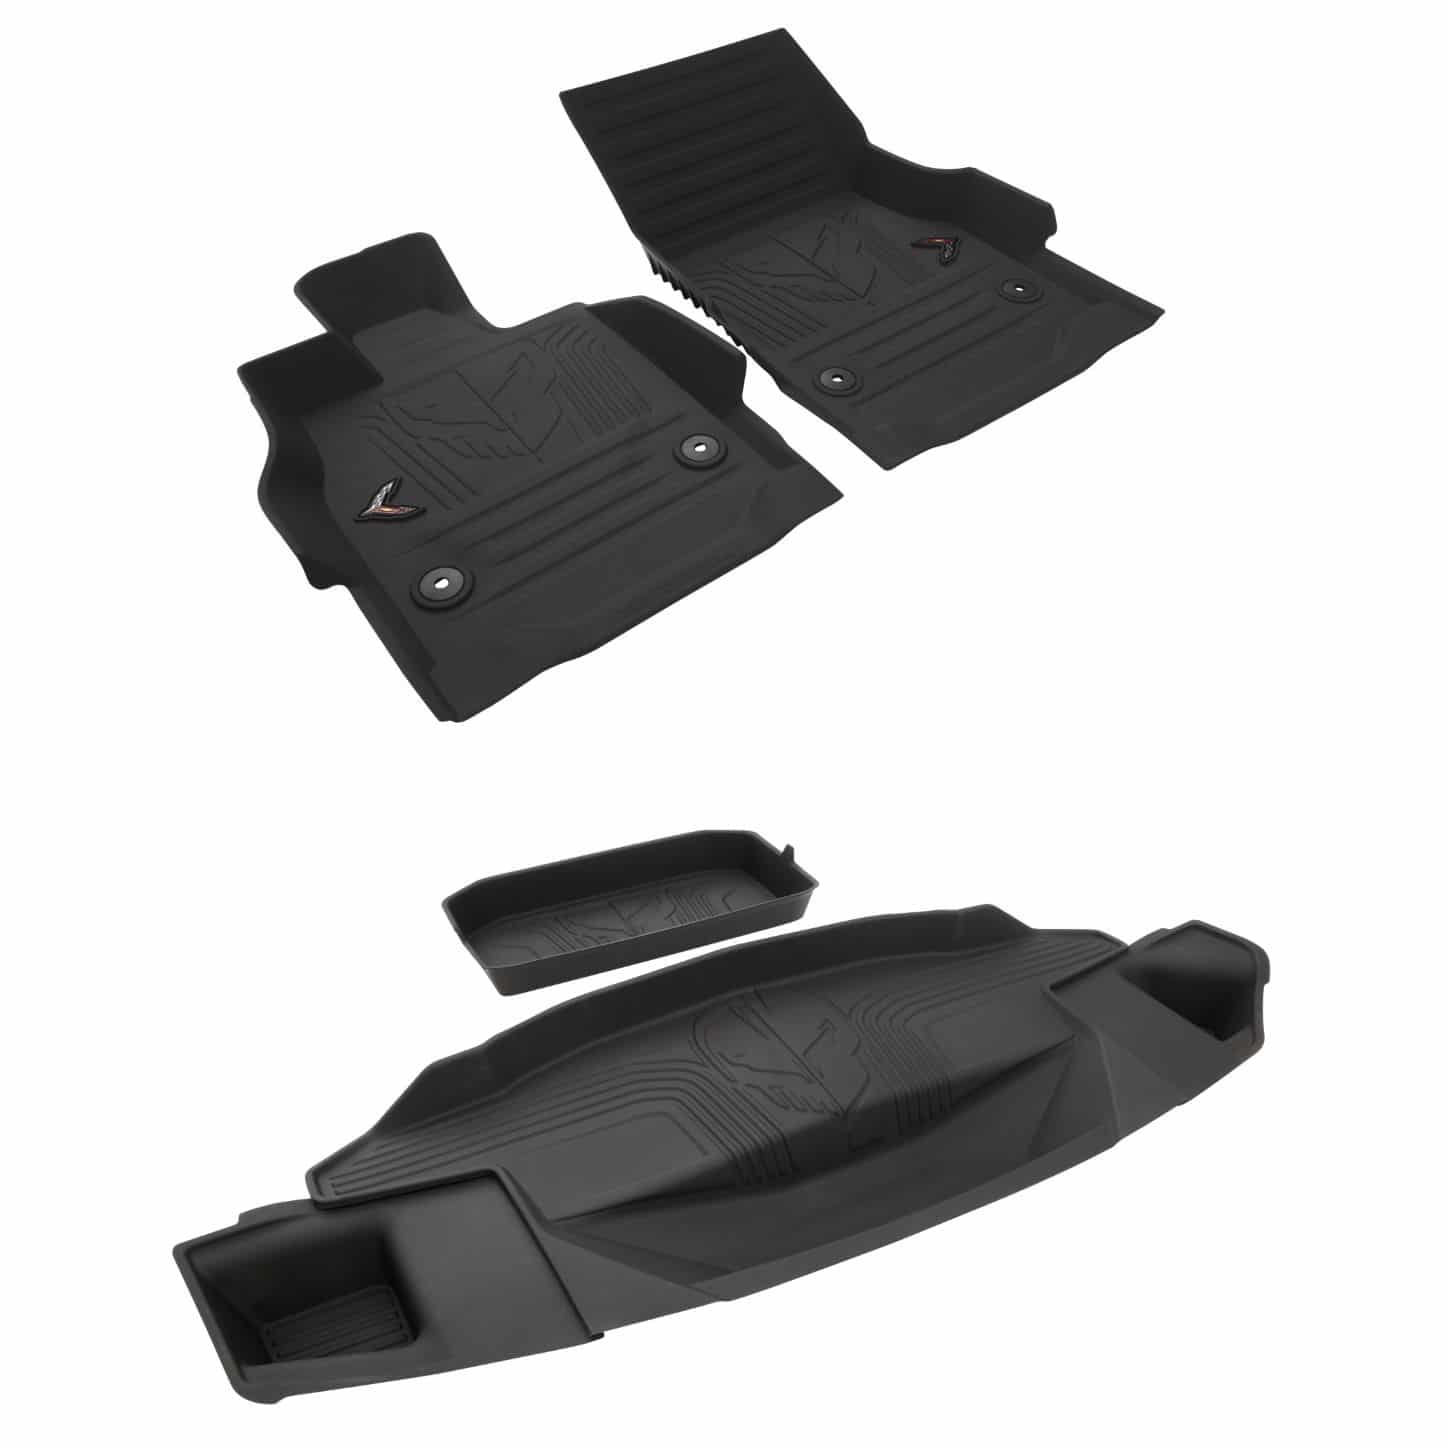 Contoured Liner Protection Package (Includes Floor liners and Cargo Area liners) $335